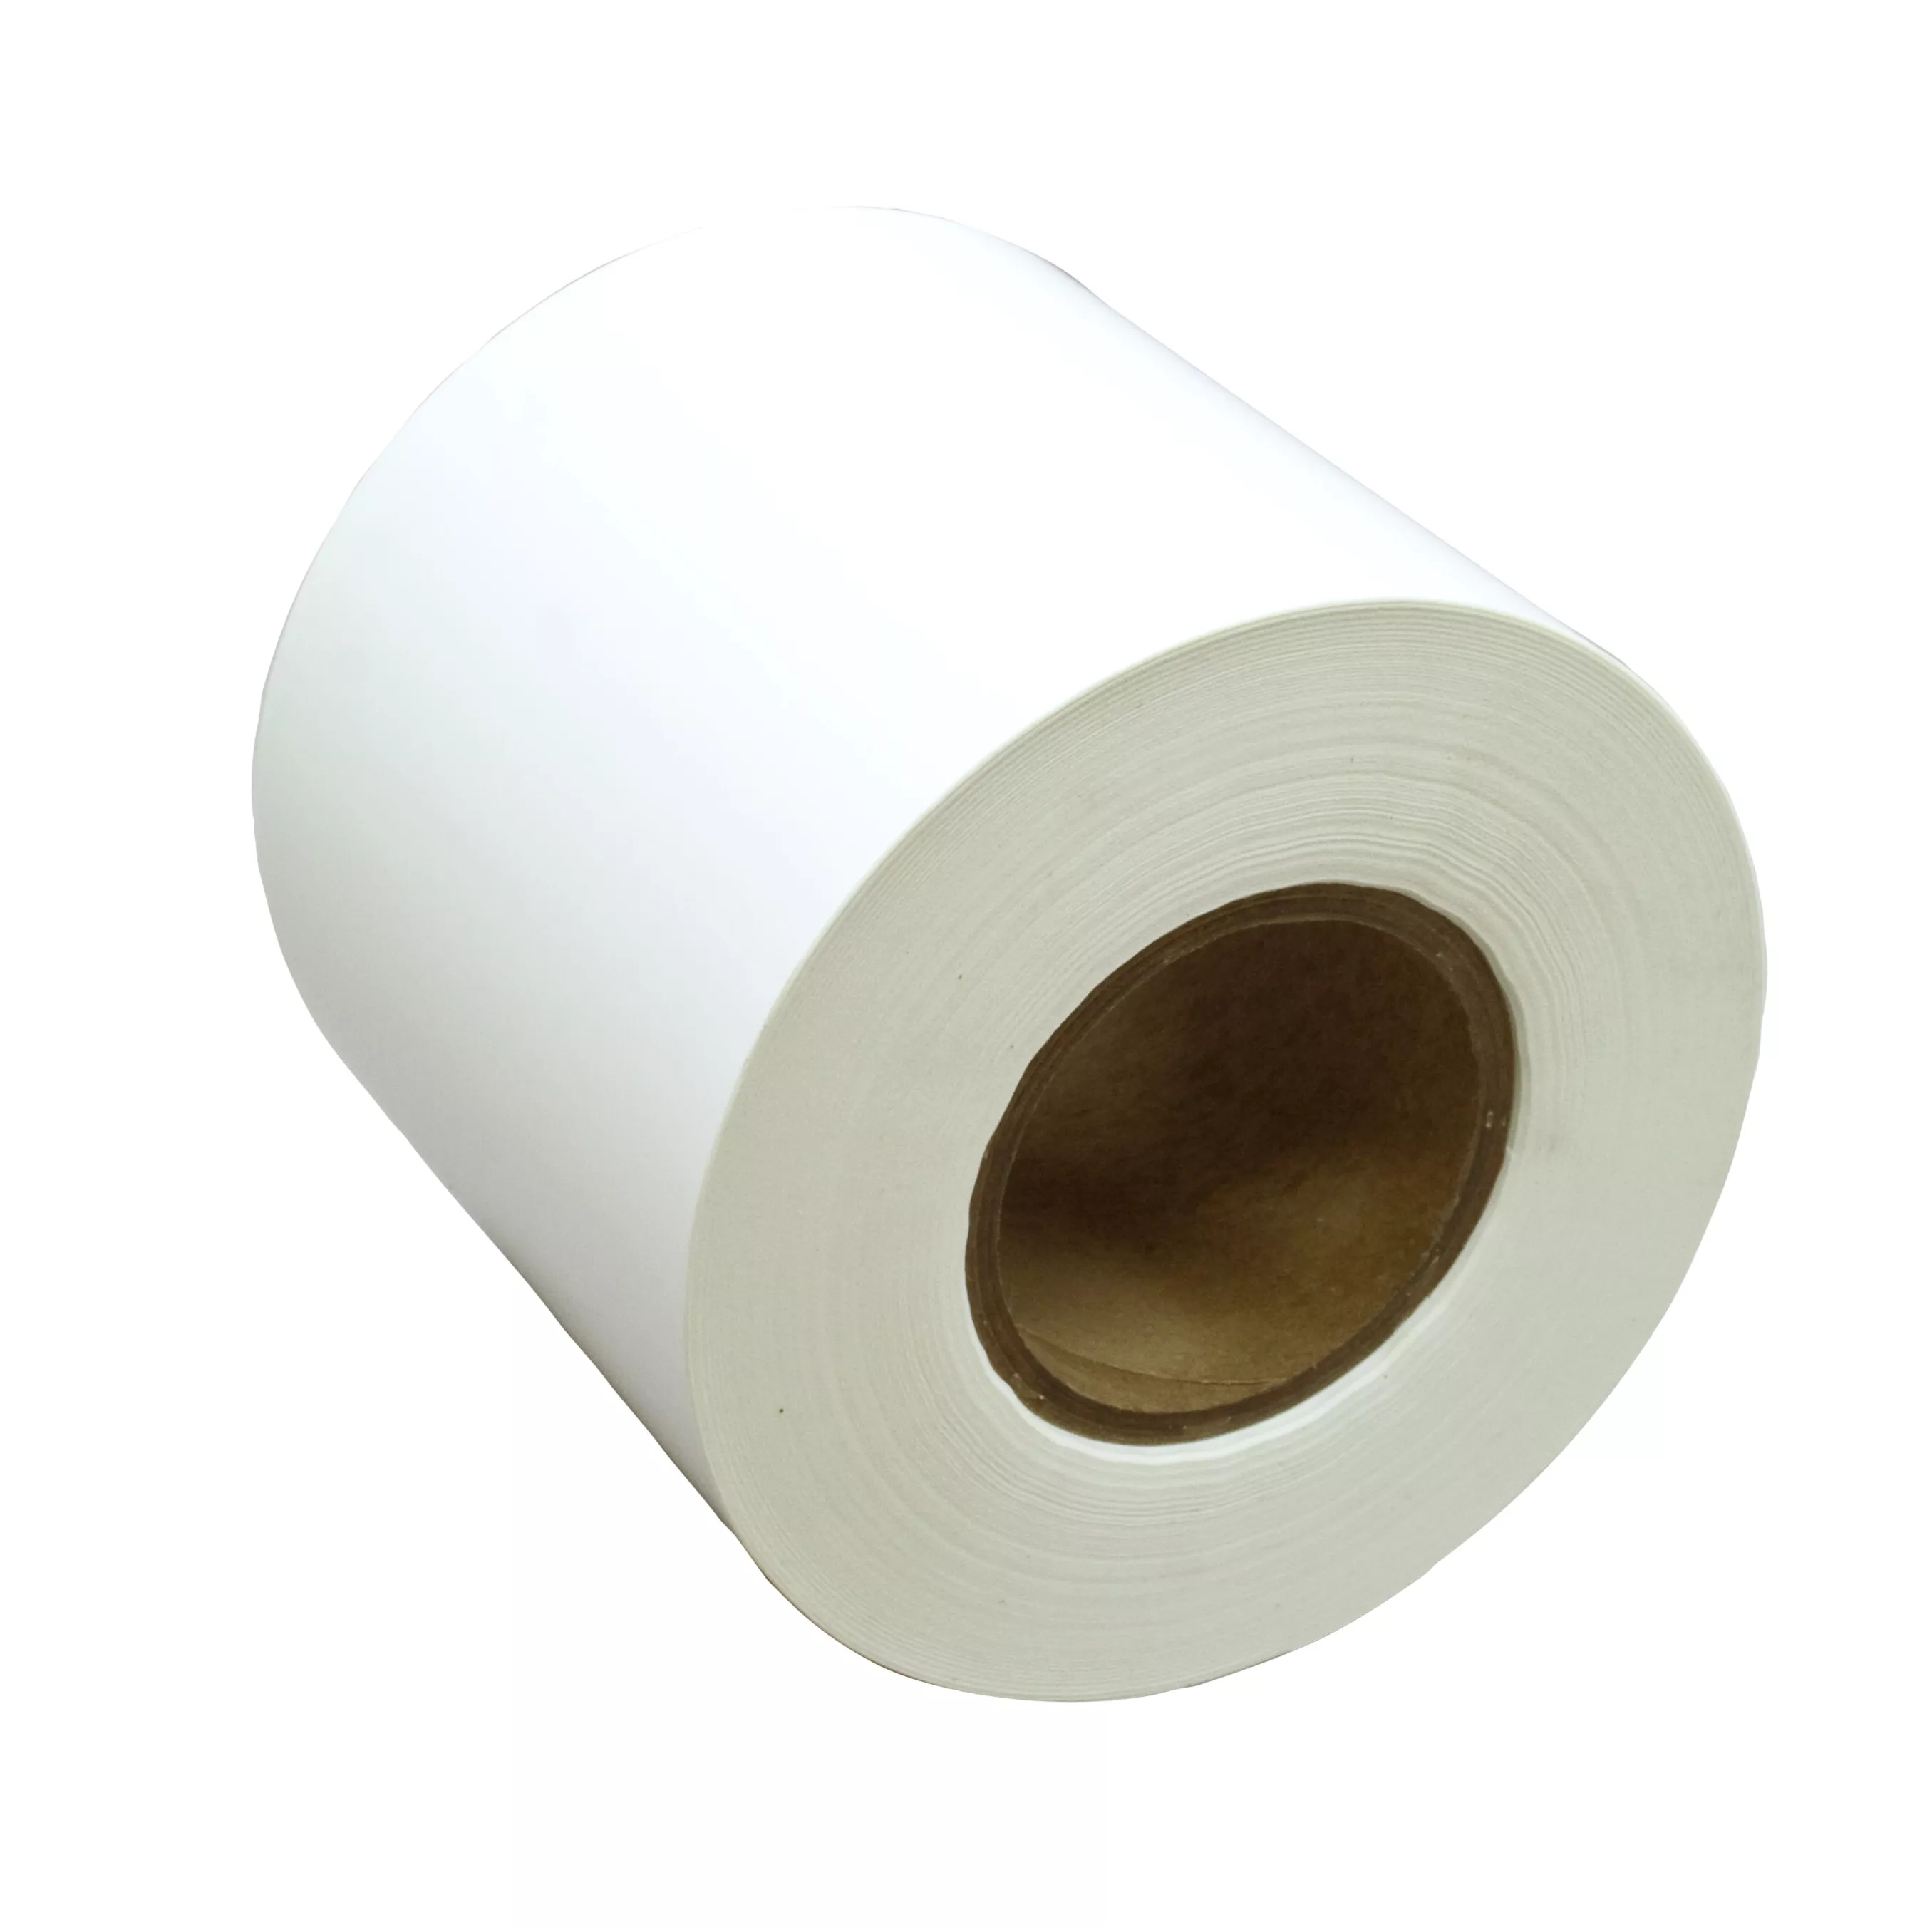 3M™ Thermal Transfer Label Material 7818, Silver Polyester Matte, 6 in x
1668 ft, 1 Roll/Case